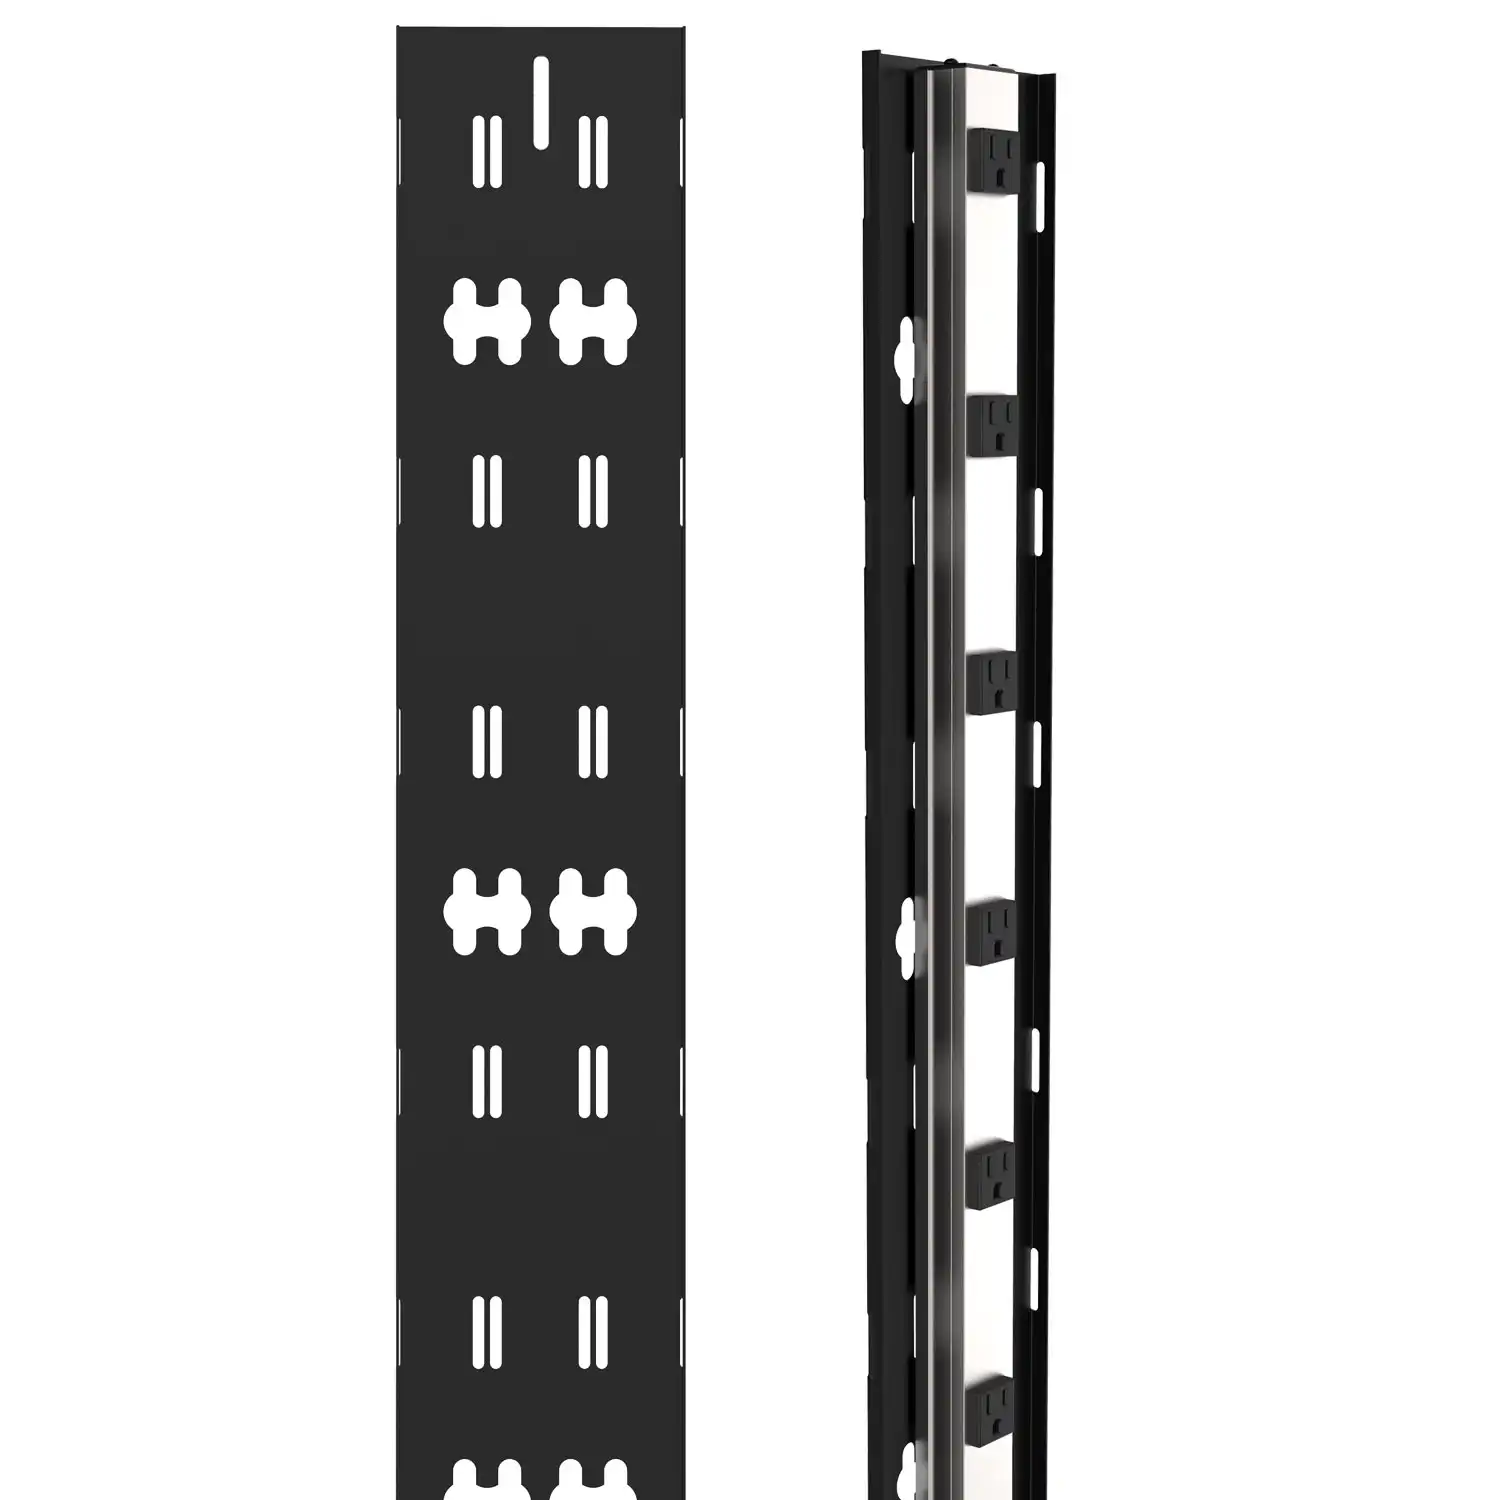 VCT Series - Hammond Manufacturing Rack Systems - KGA Enclosures Ltd